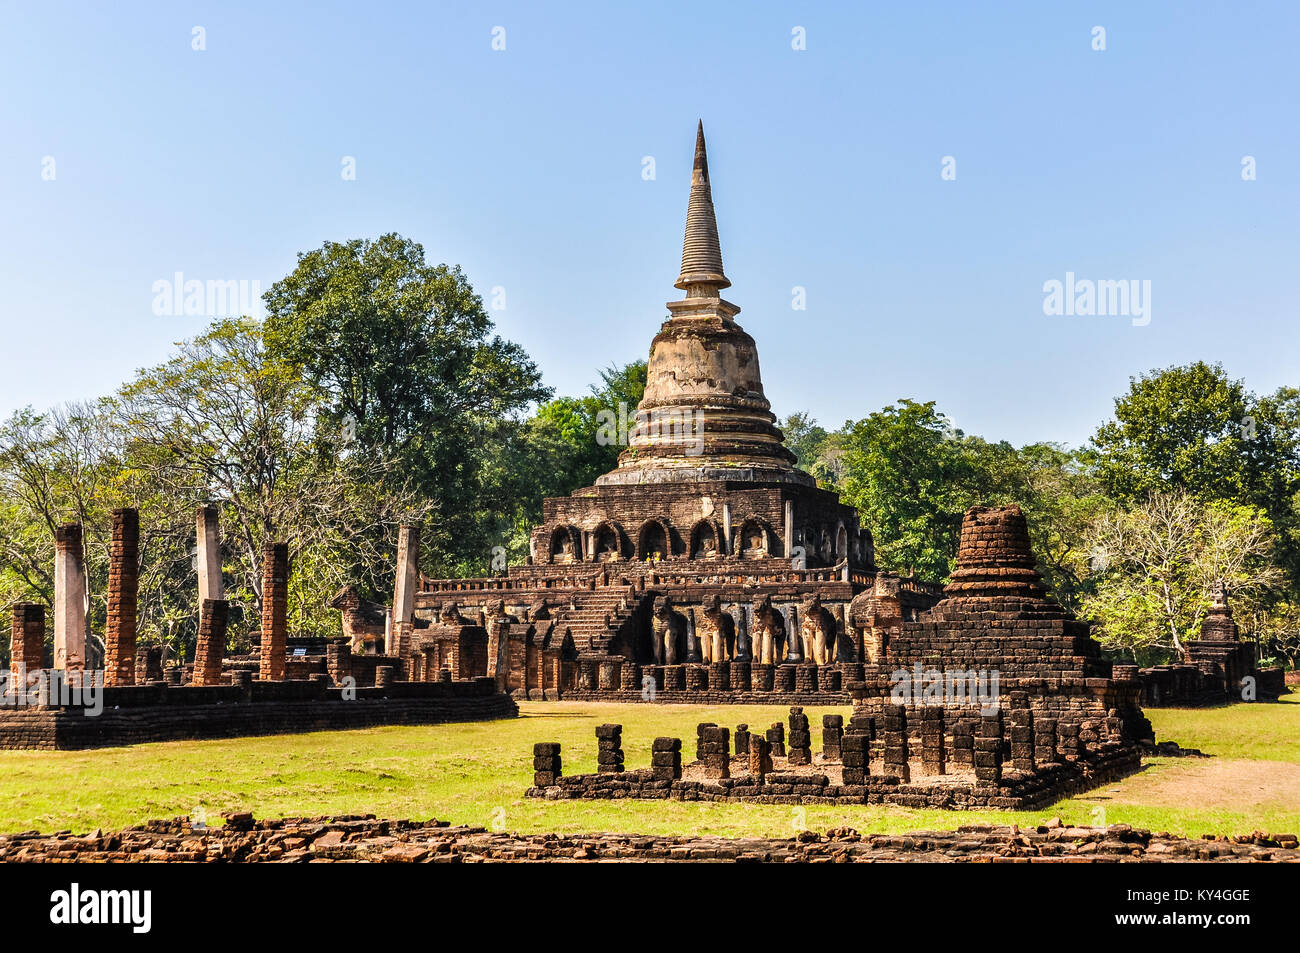 Wat Chang Lom in the Si Satchanalai Historical Park, Thailand Stock Photo